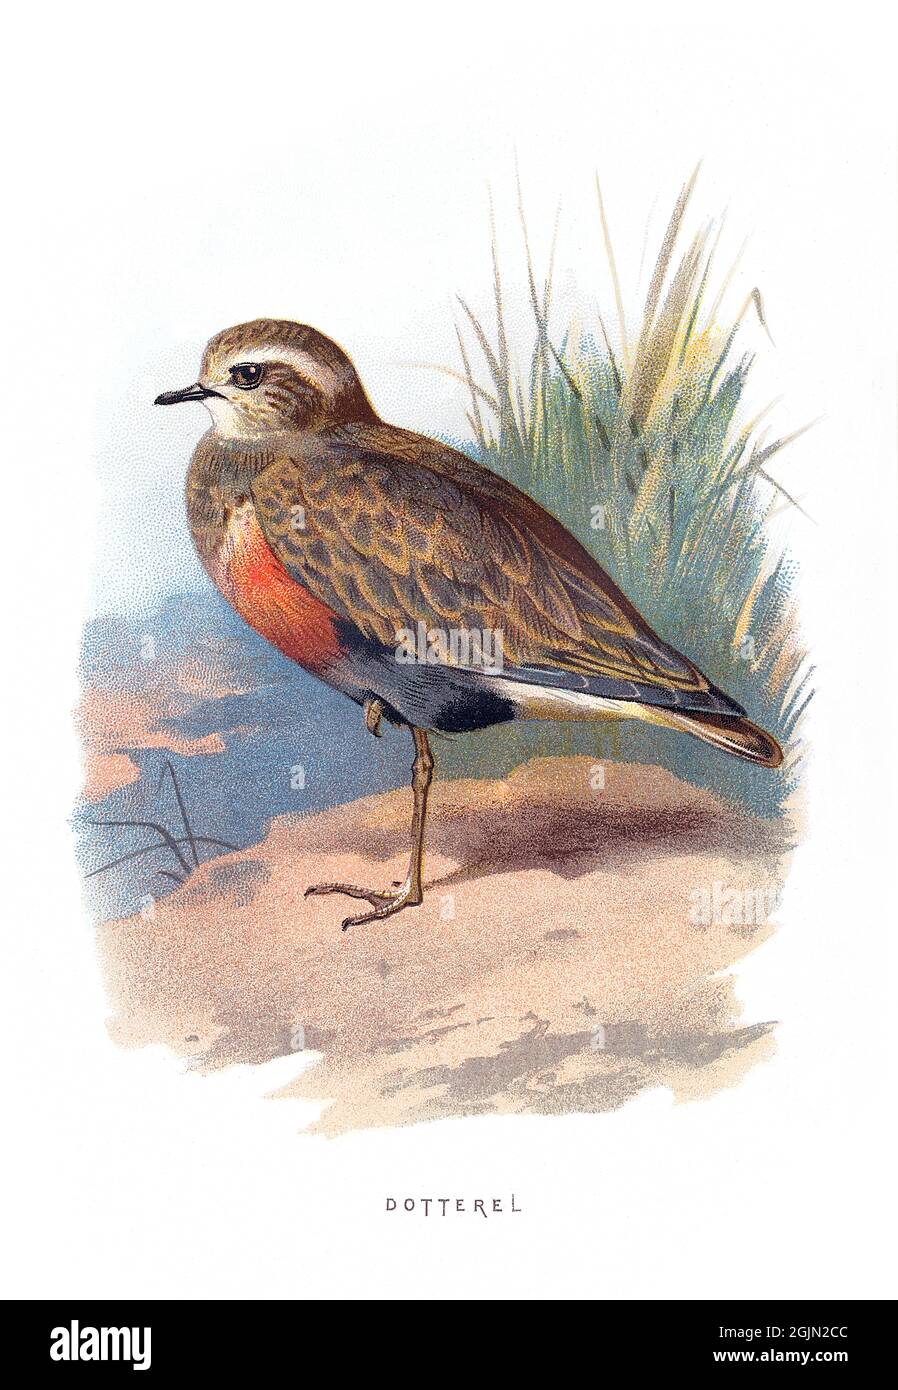 The Eurasian dotterel, Charadrius morinellus, also known as just dotterel, is a small wader in the plover family of birds. Stock Photo